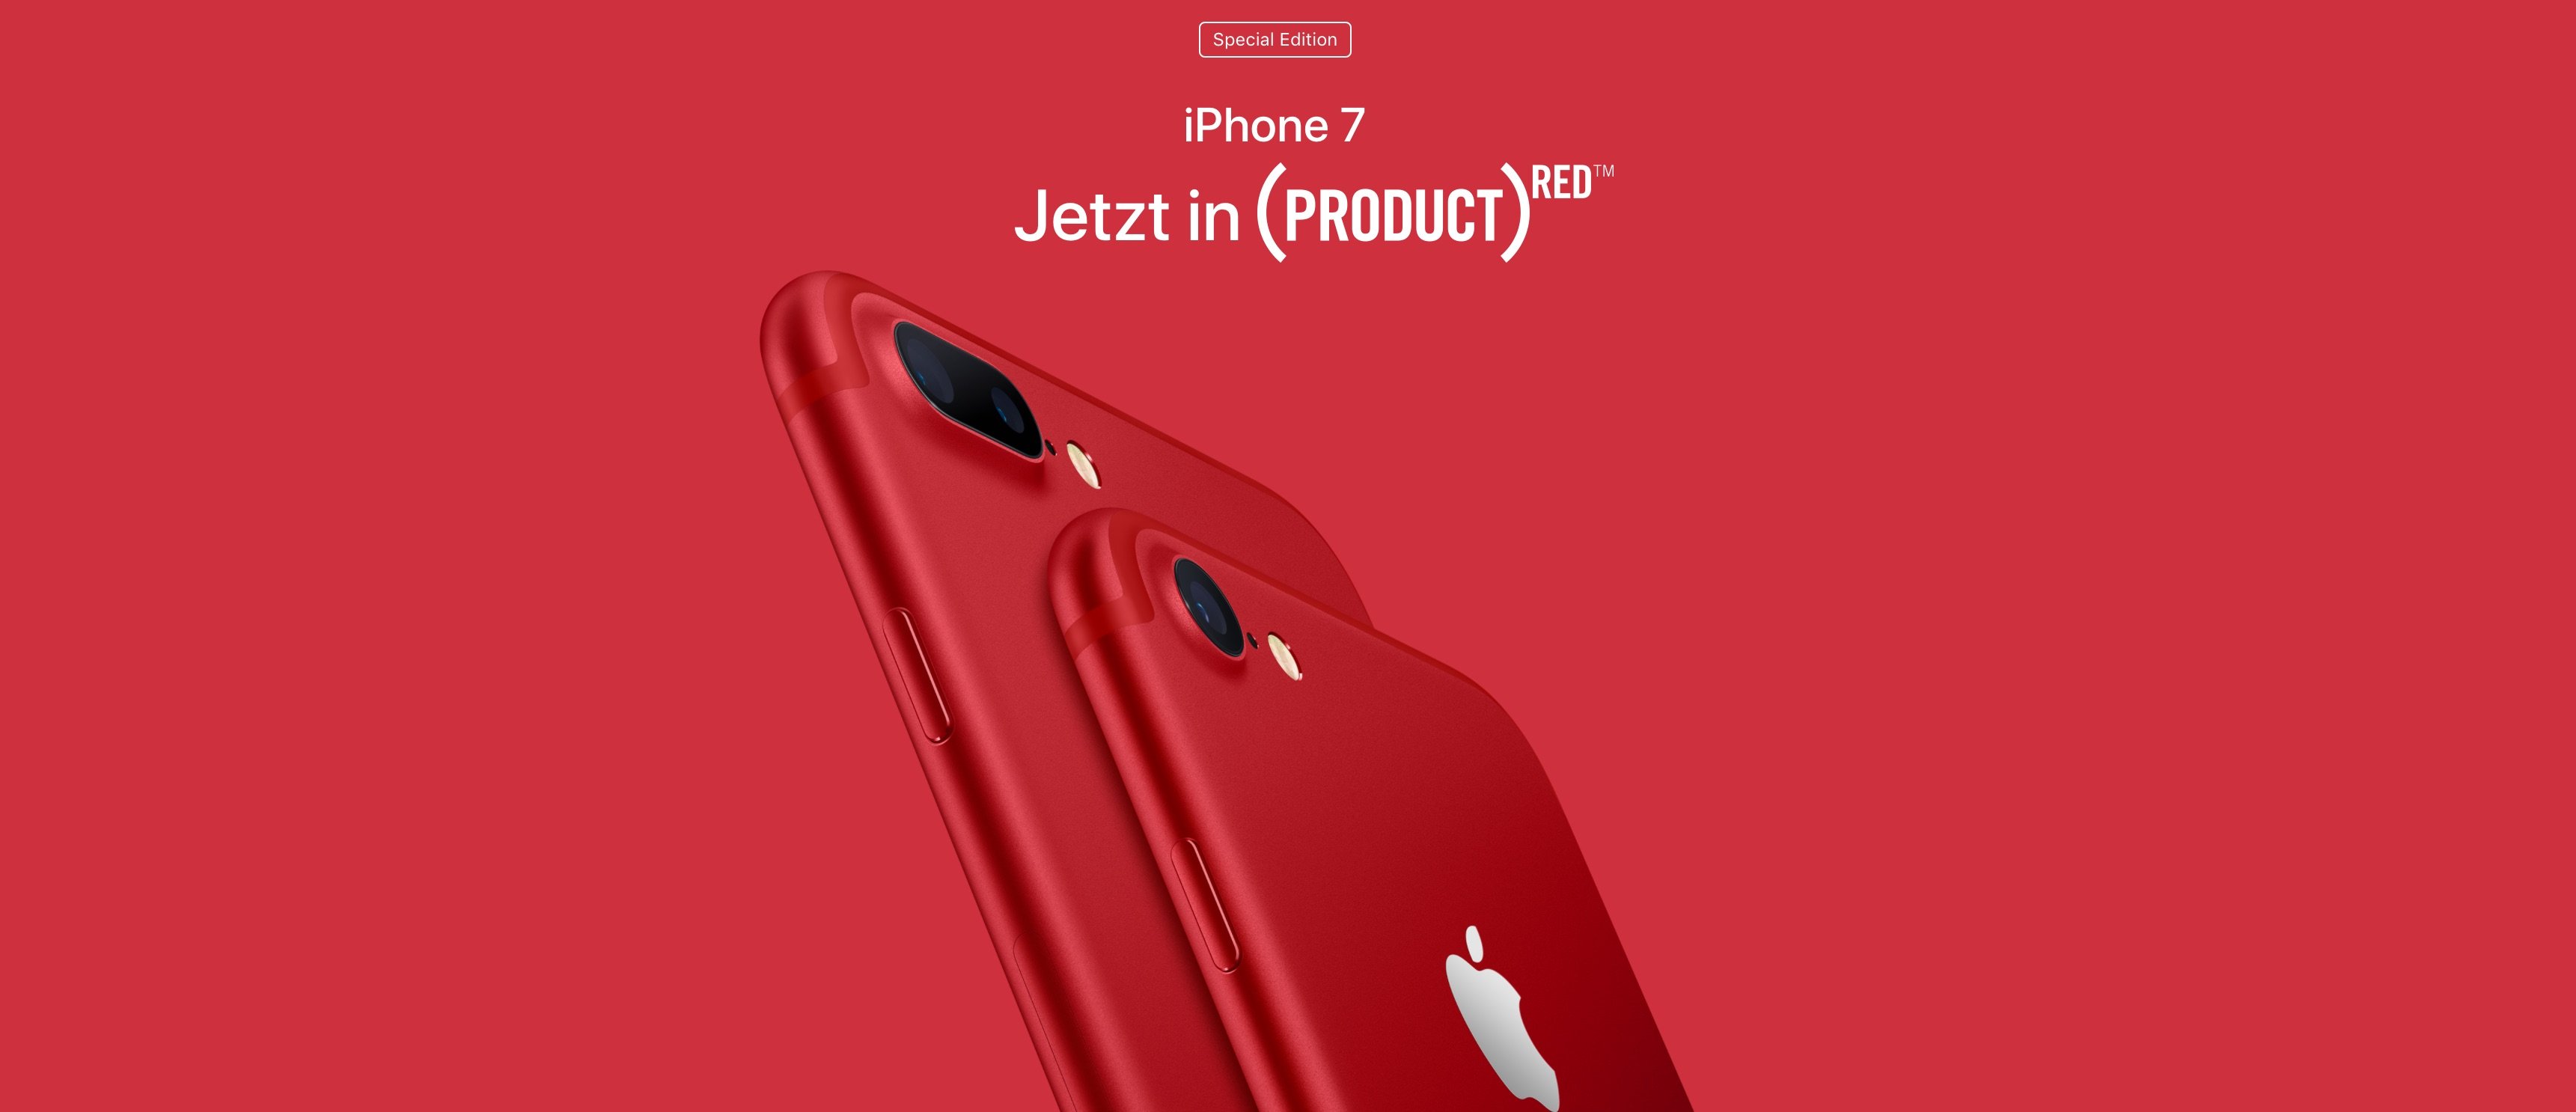 Apple iPhone 7 RED Edition: Spenden auch in China 1